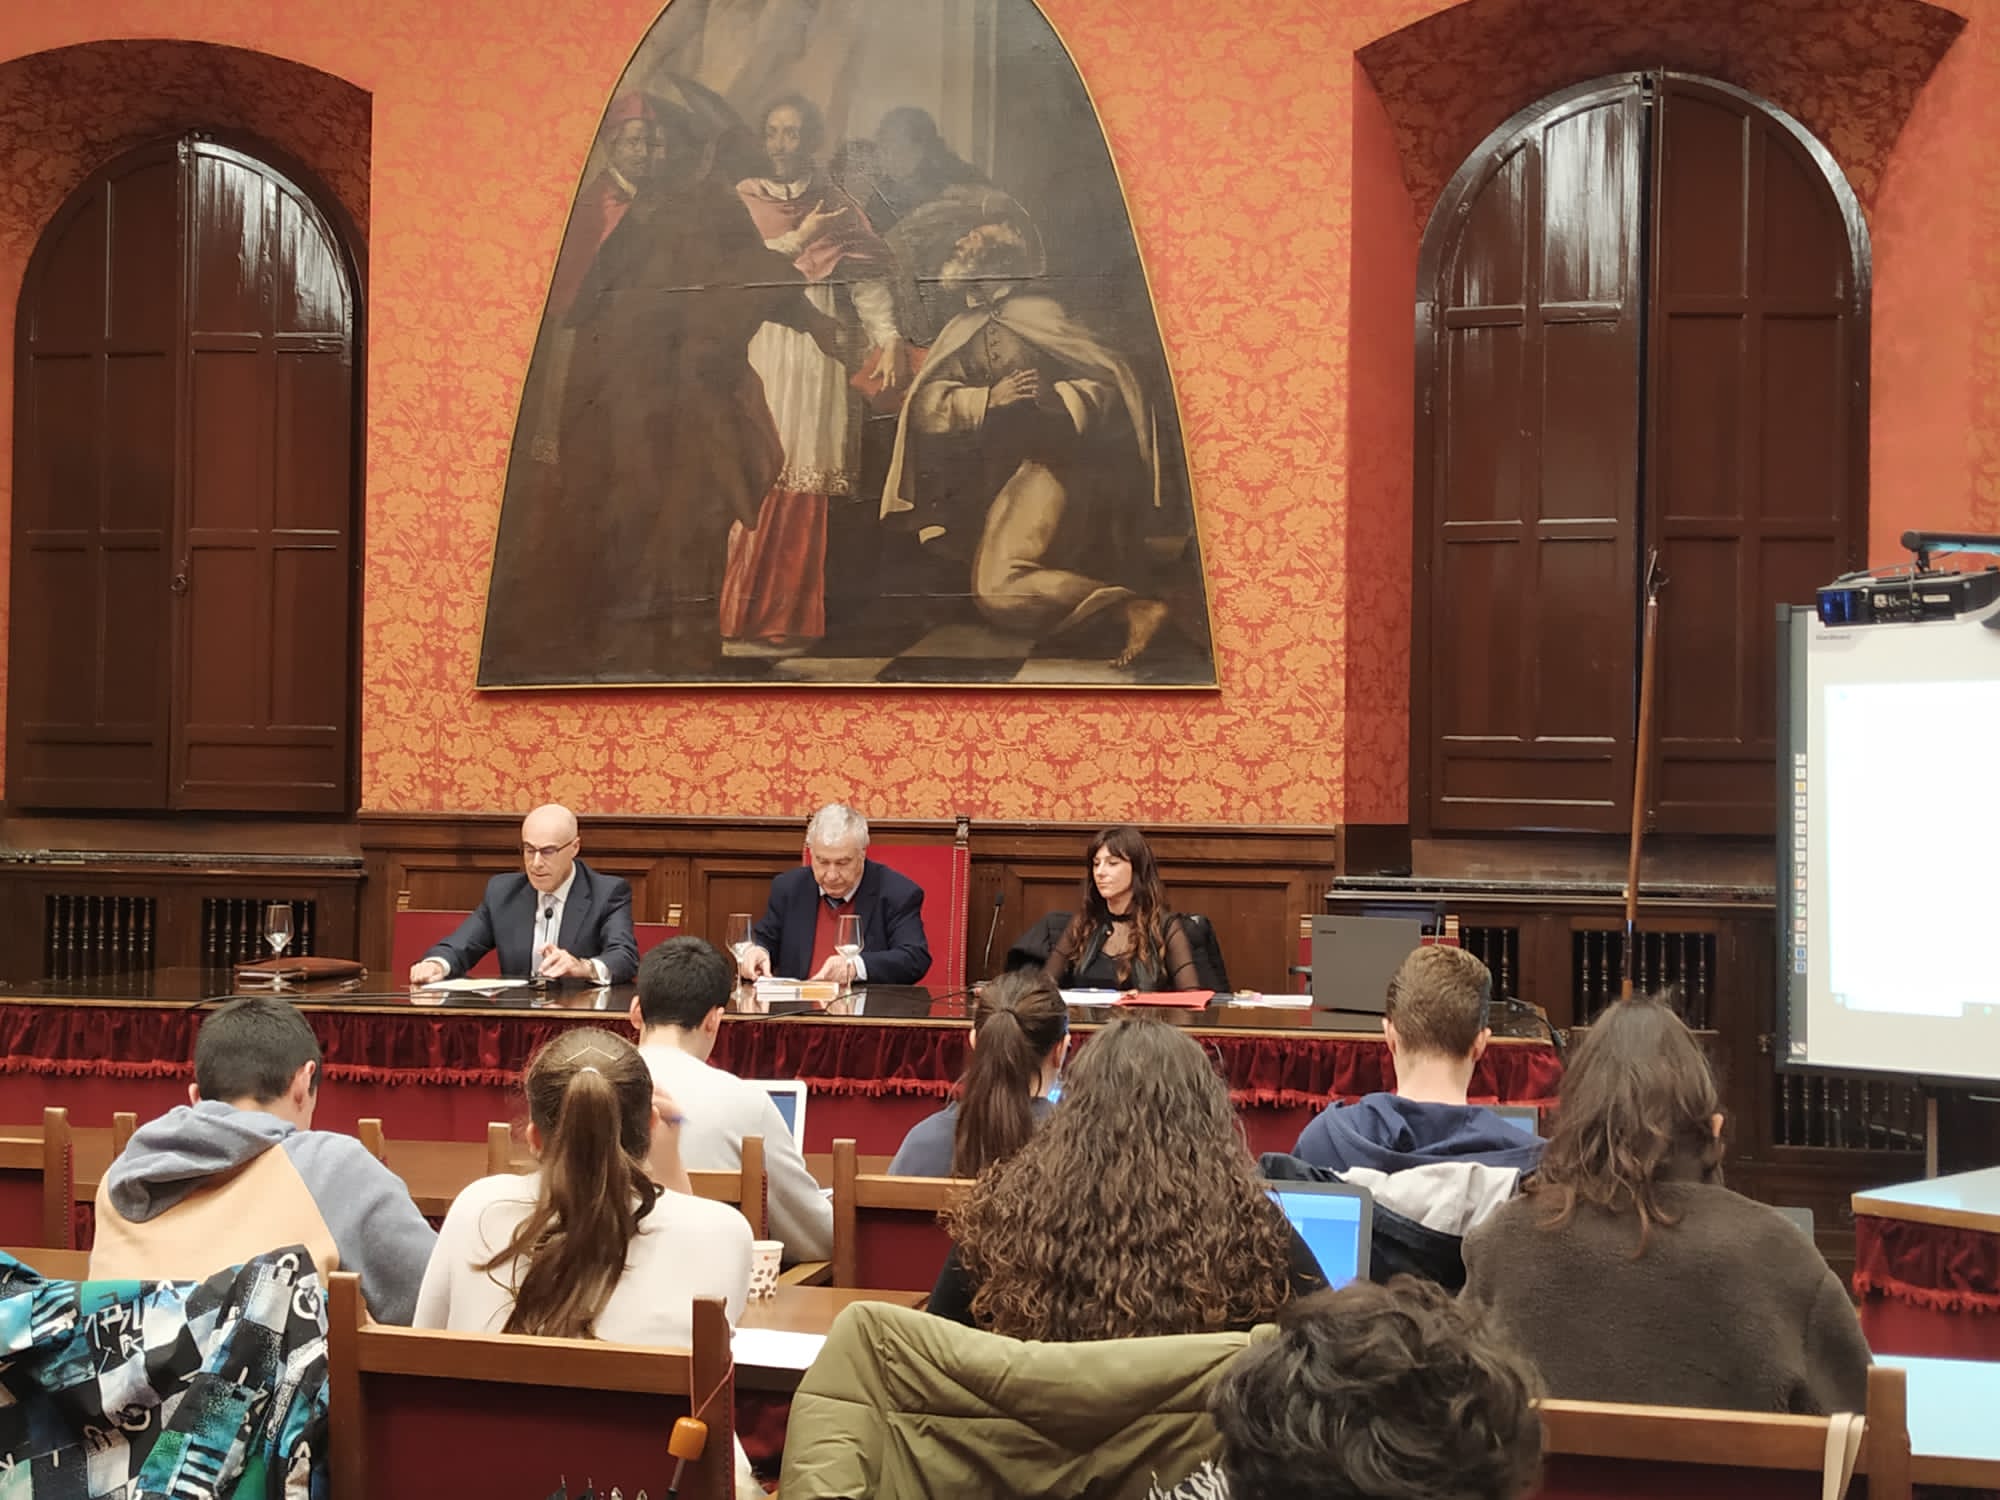 Image taken from the third row in which you can see the intervention of professors Porras Ramírez and Valentina Faggiani